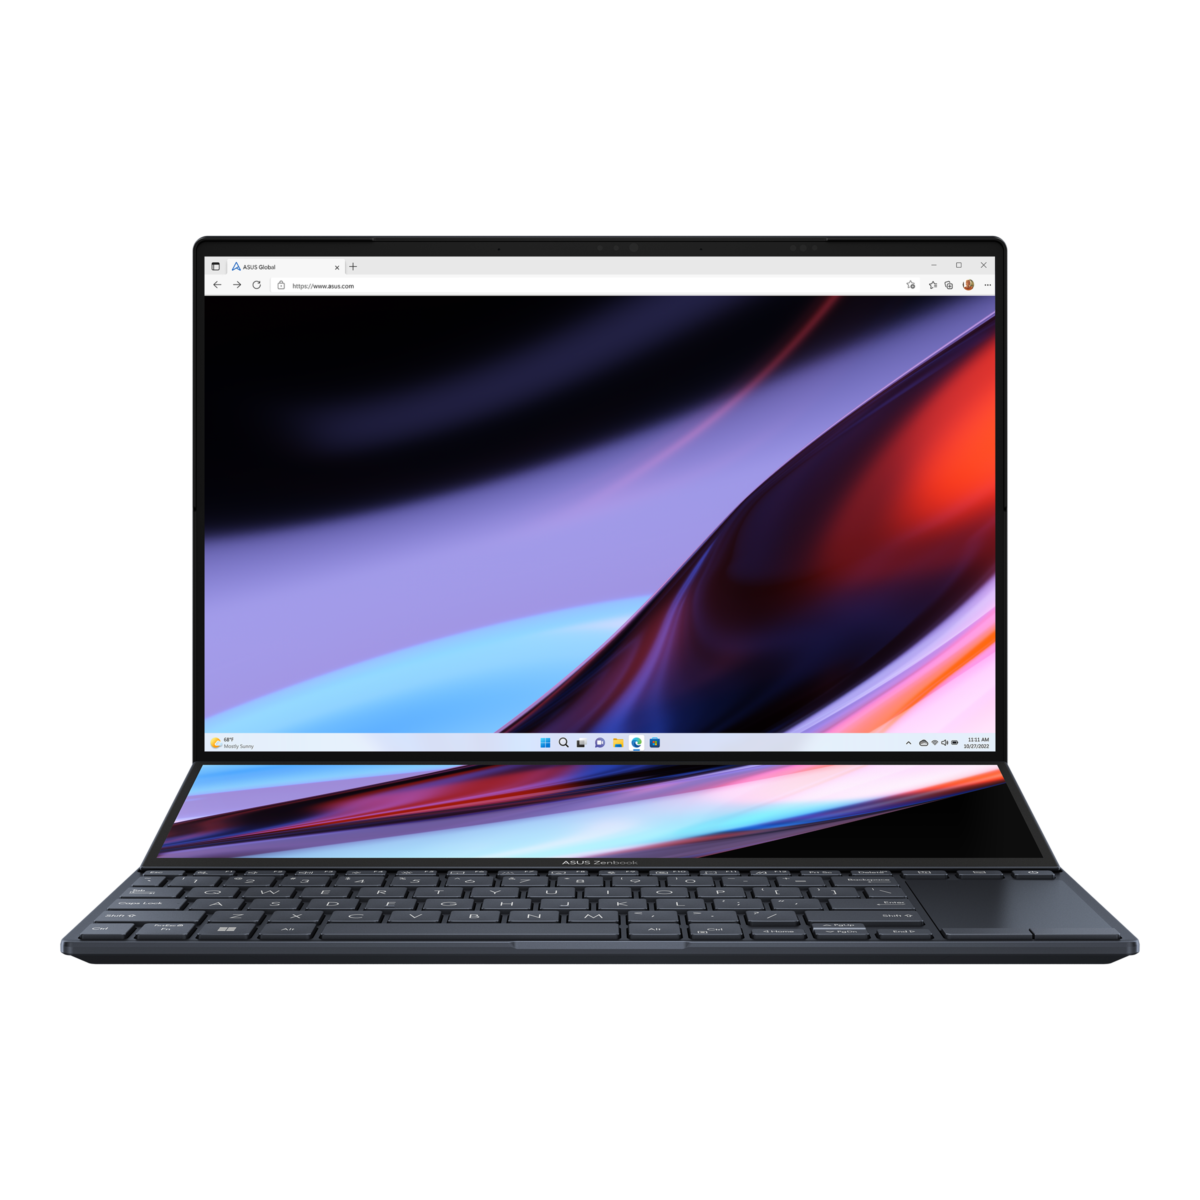  The ASUS Zenbook Pro 14 Duo OLED is the world’s first laptop with the innovative Active Aerodynamic System Ultra design which raises the rear of the laptop by 12 °.